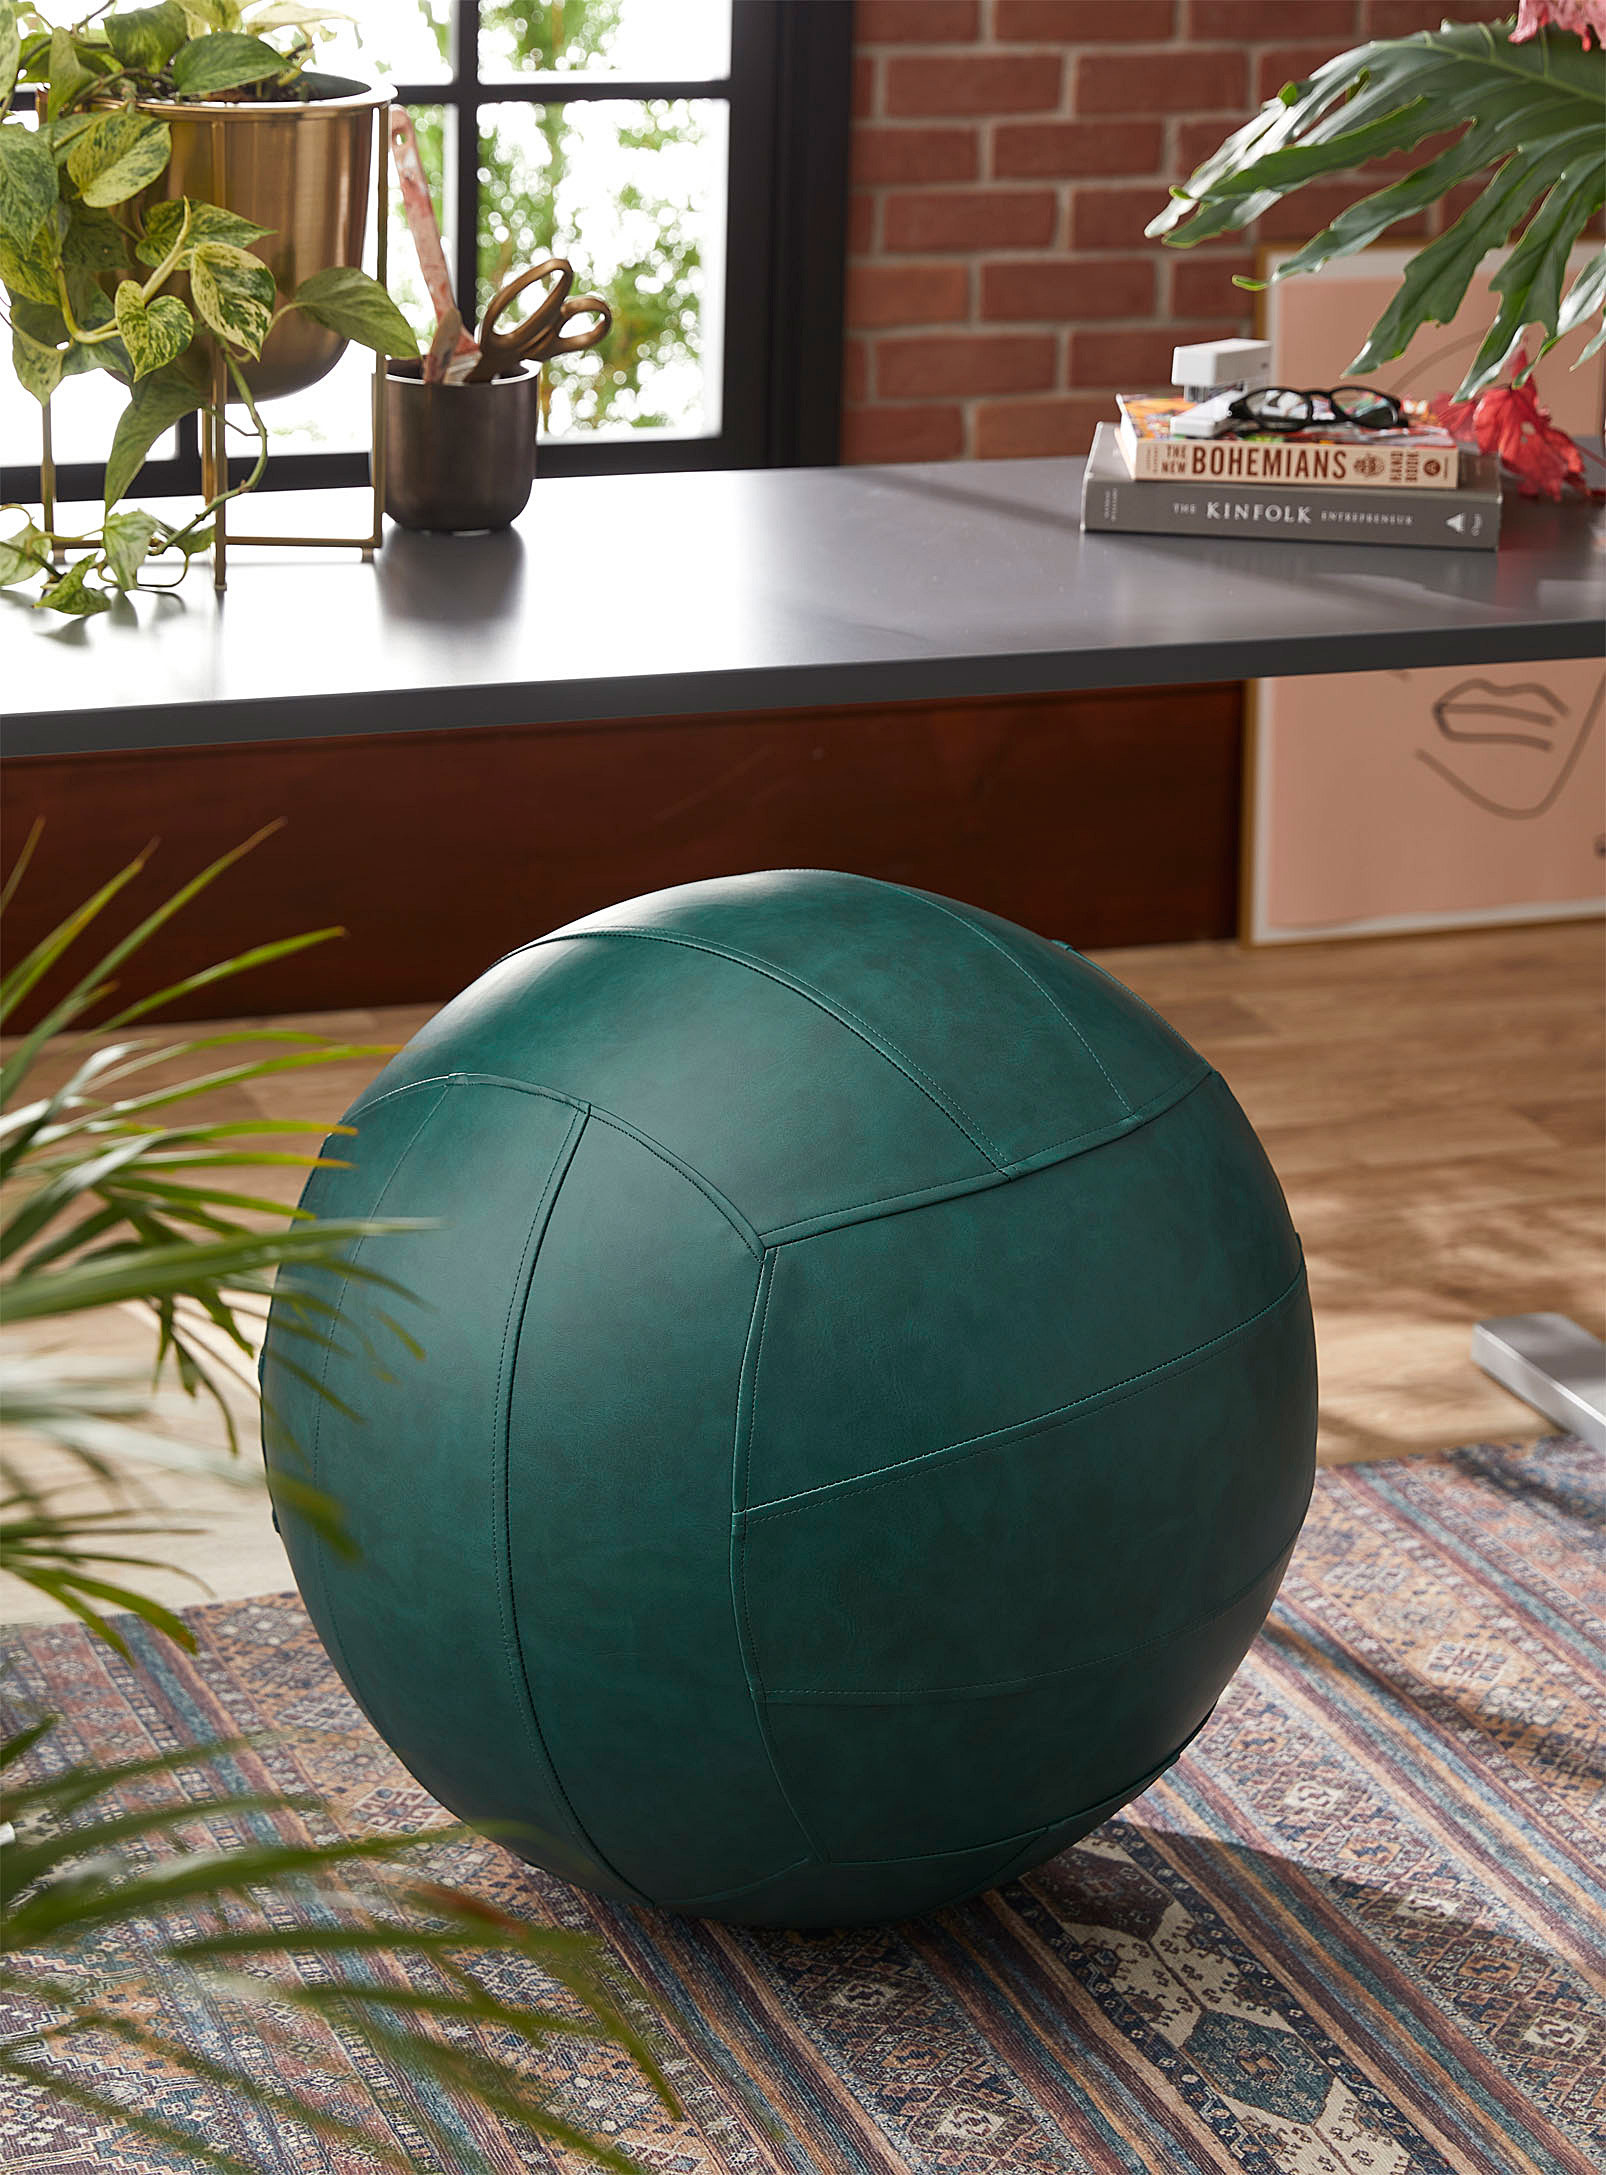 A large faux leather ball on a carpet